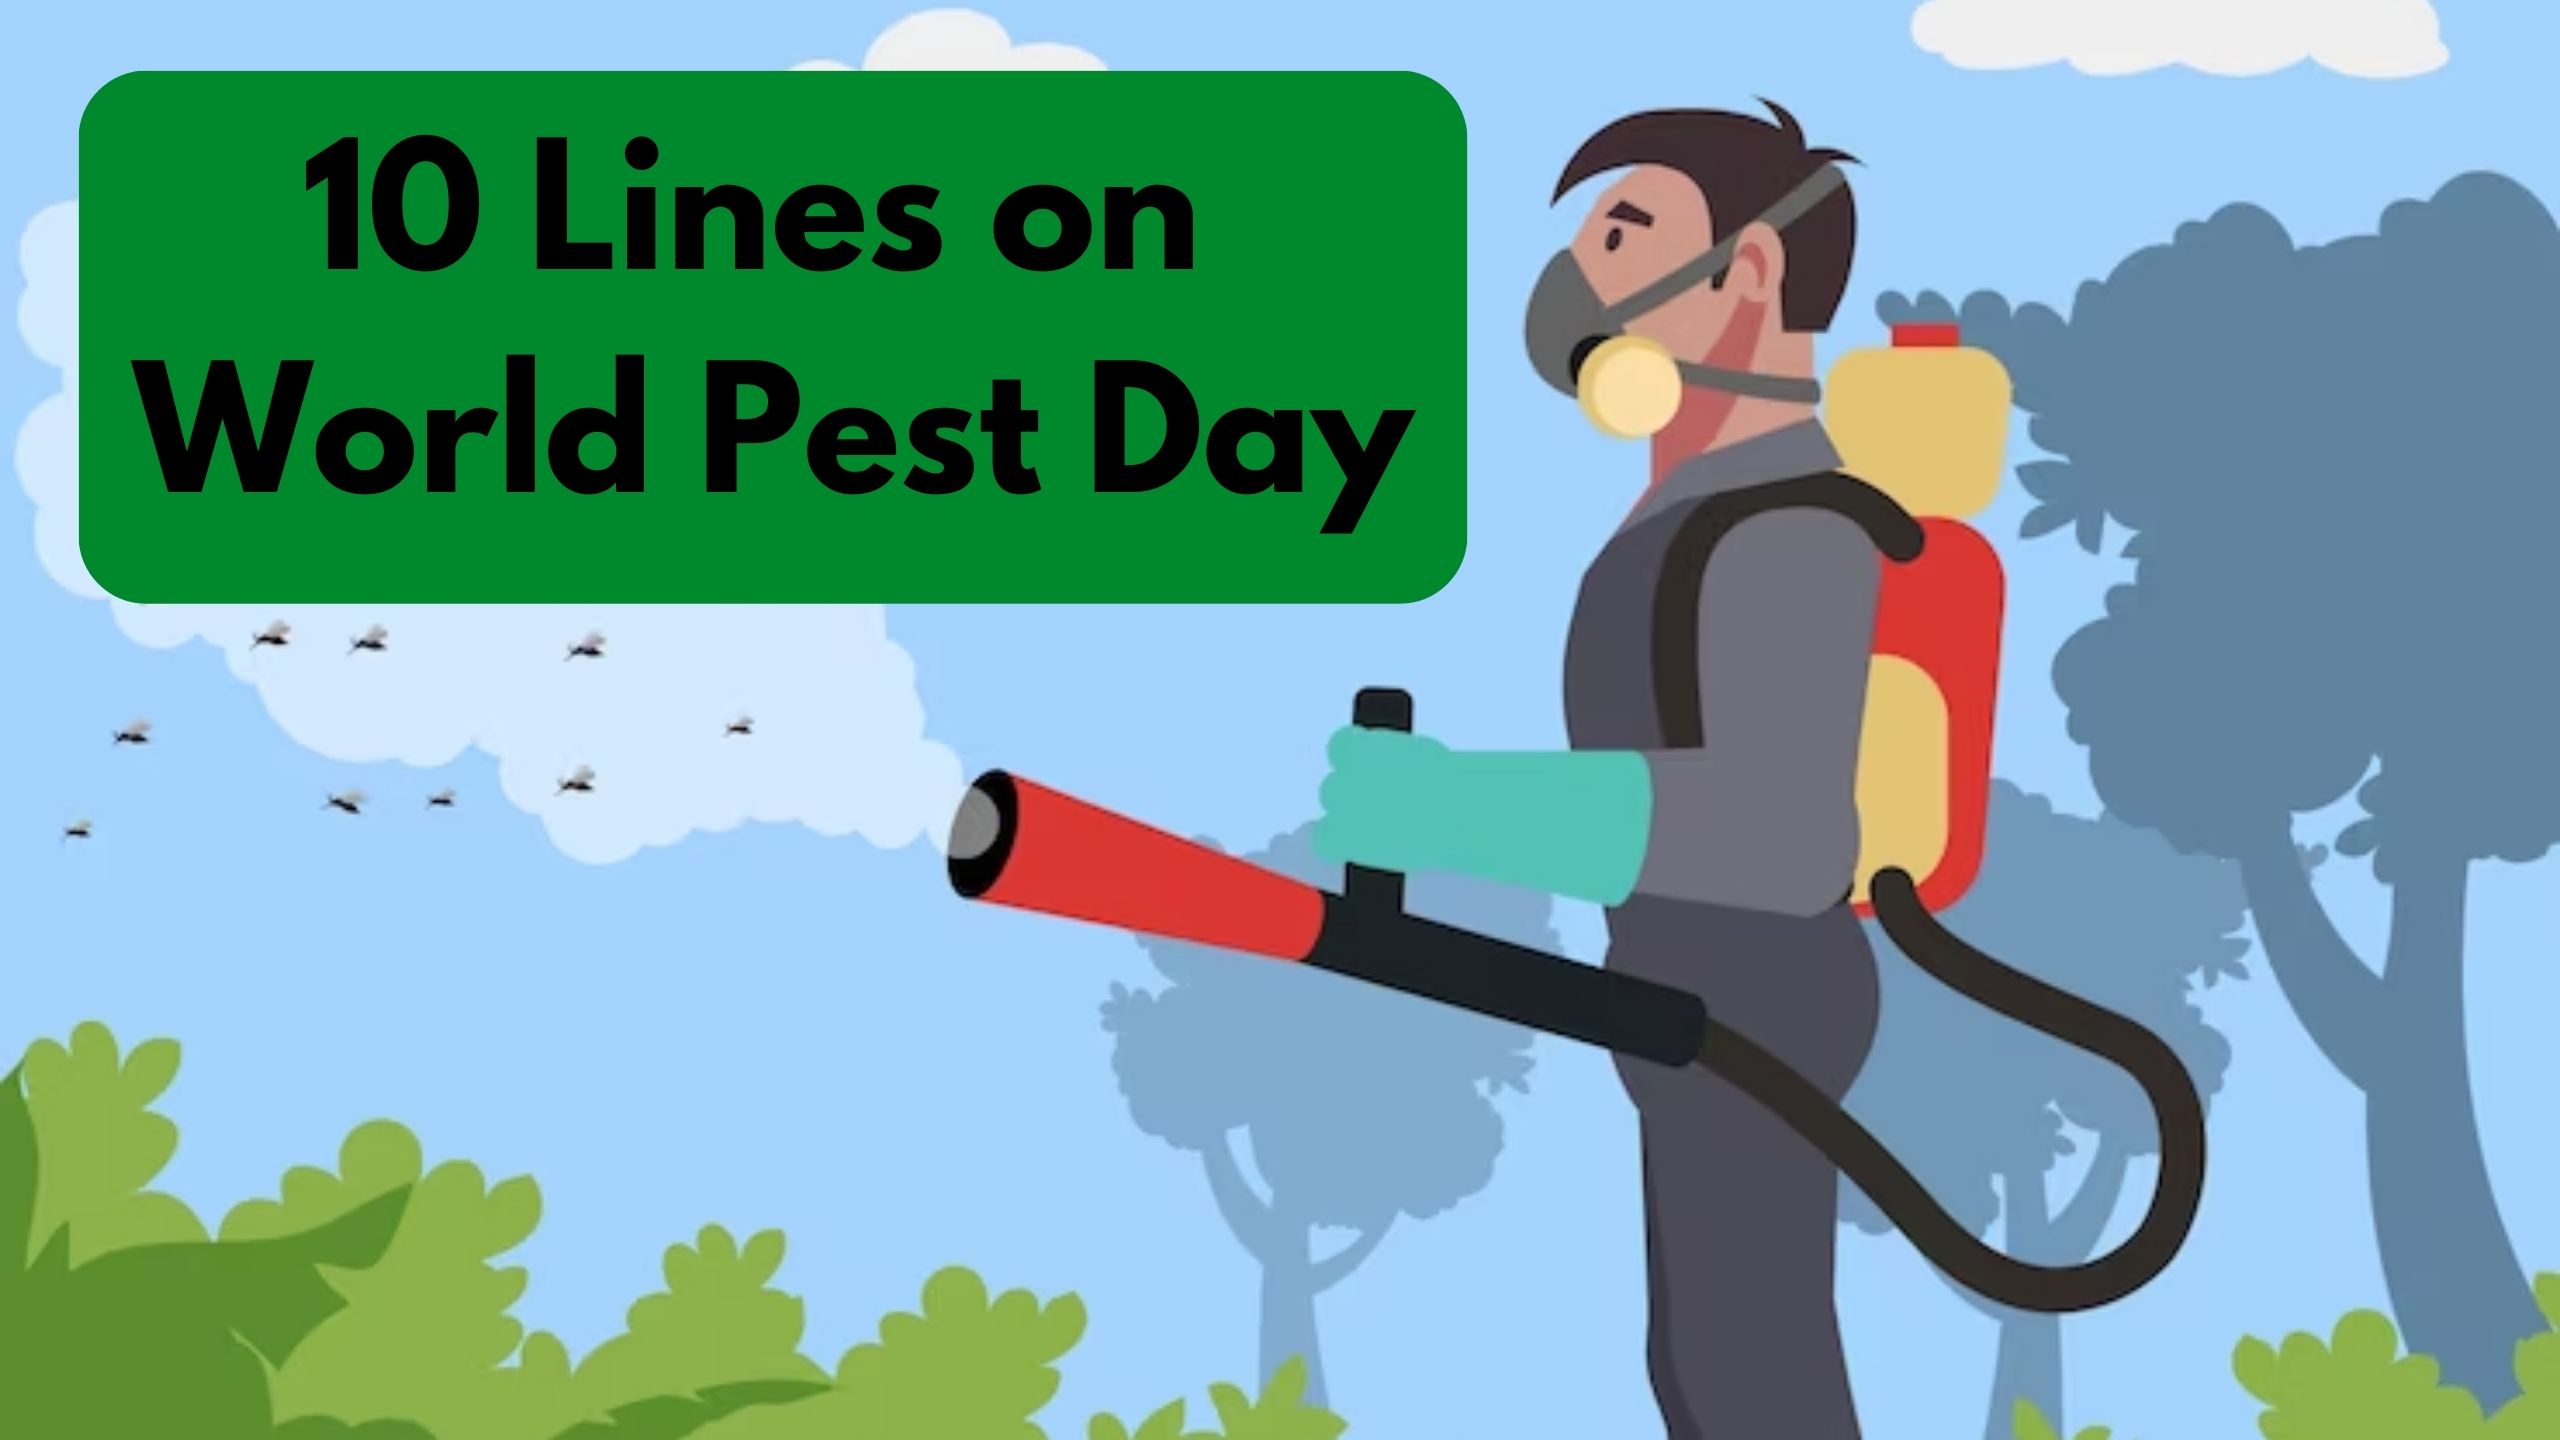 10 Lines on World Pest Day